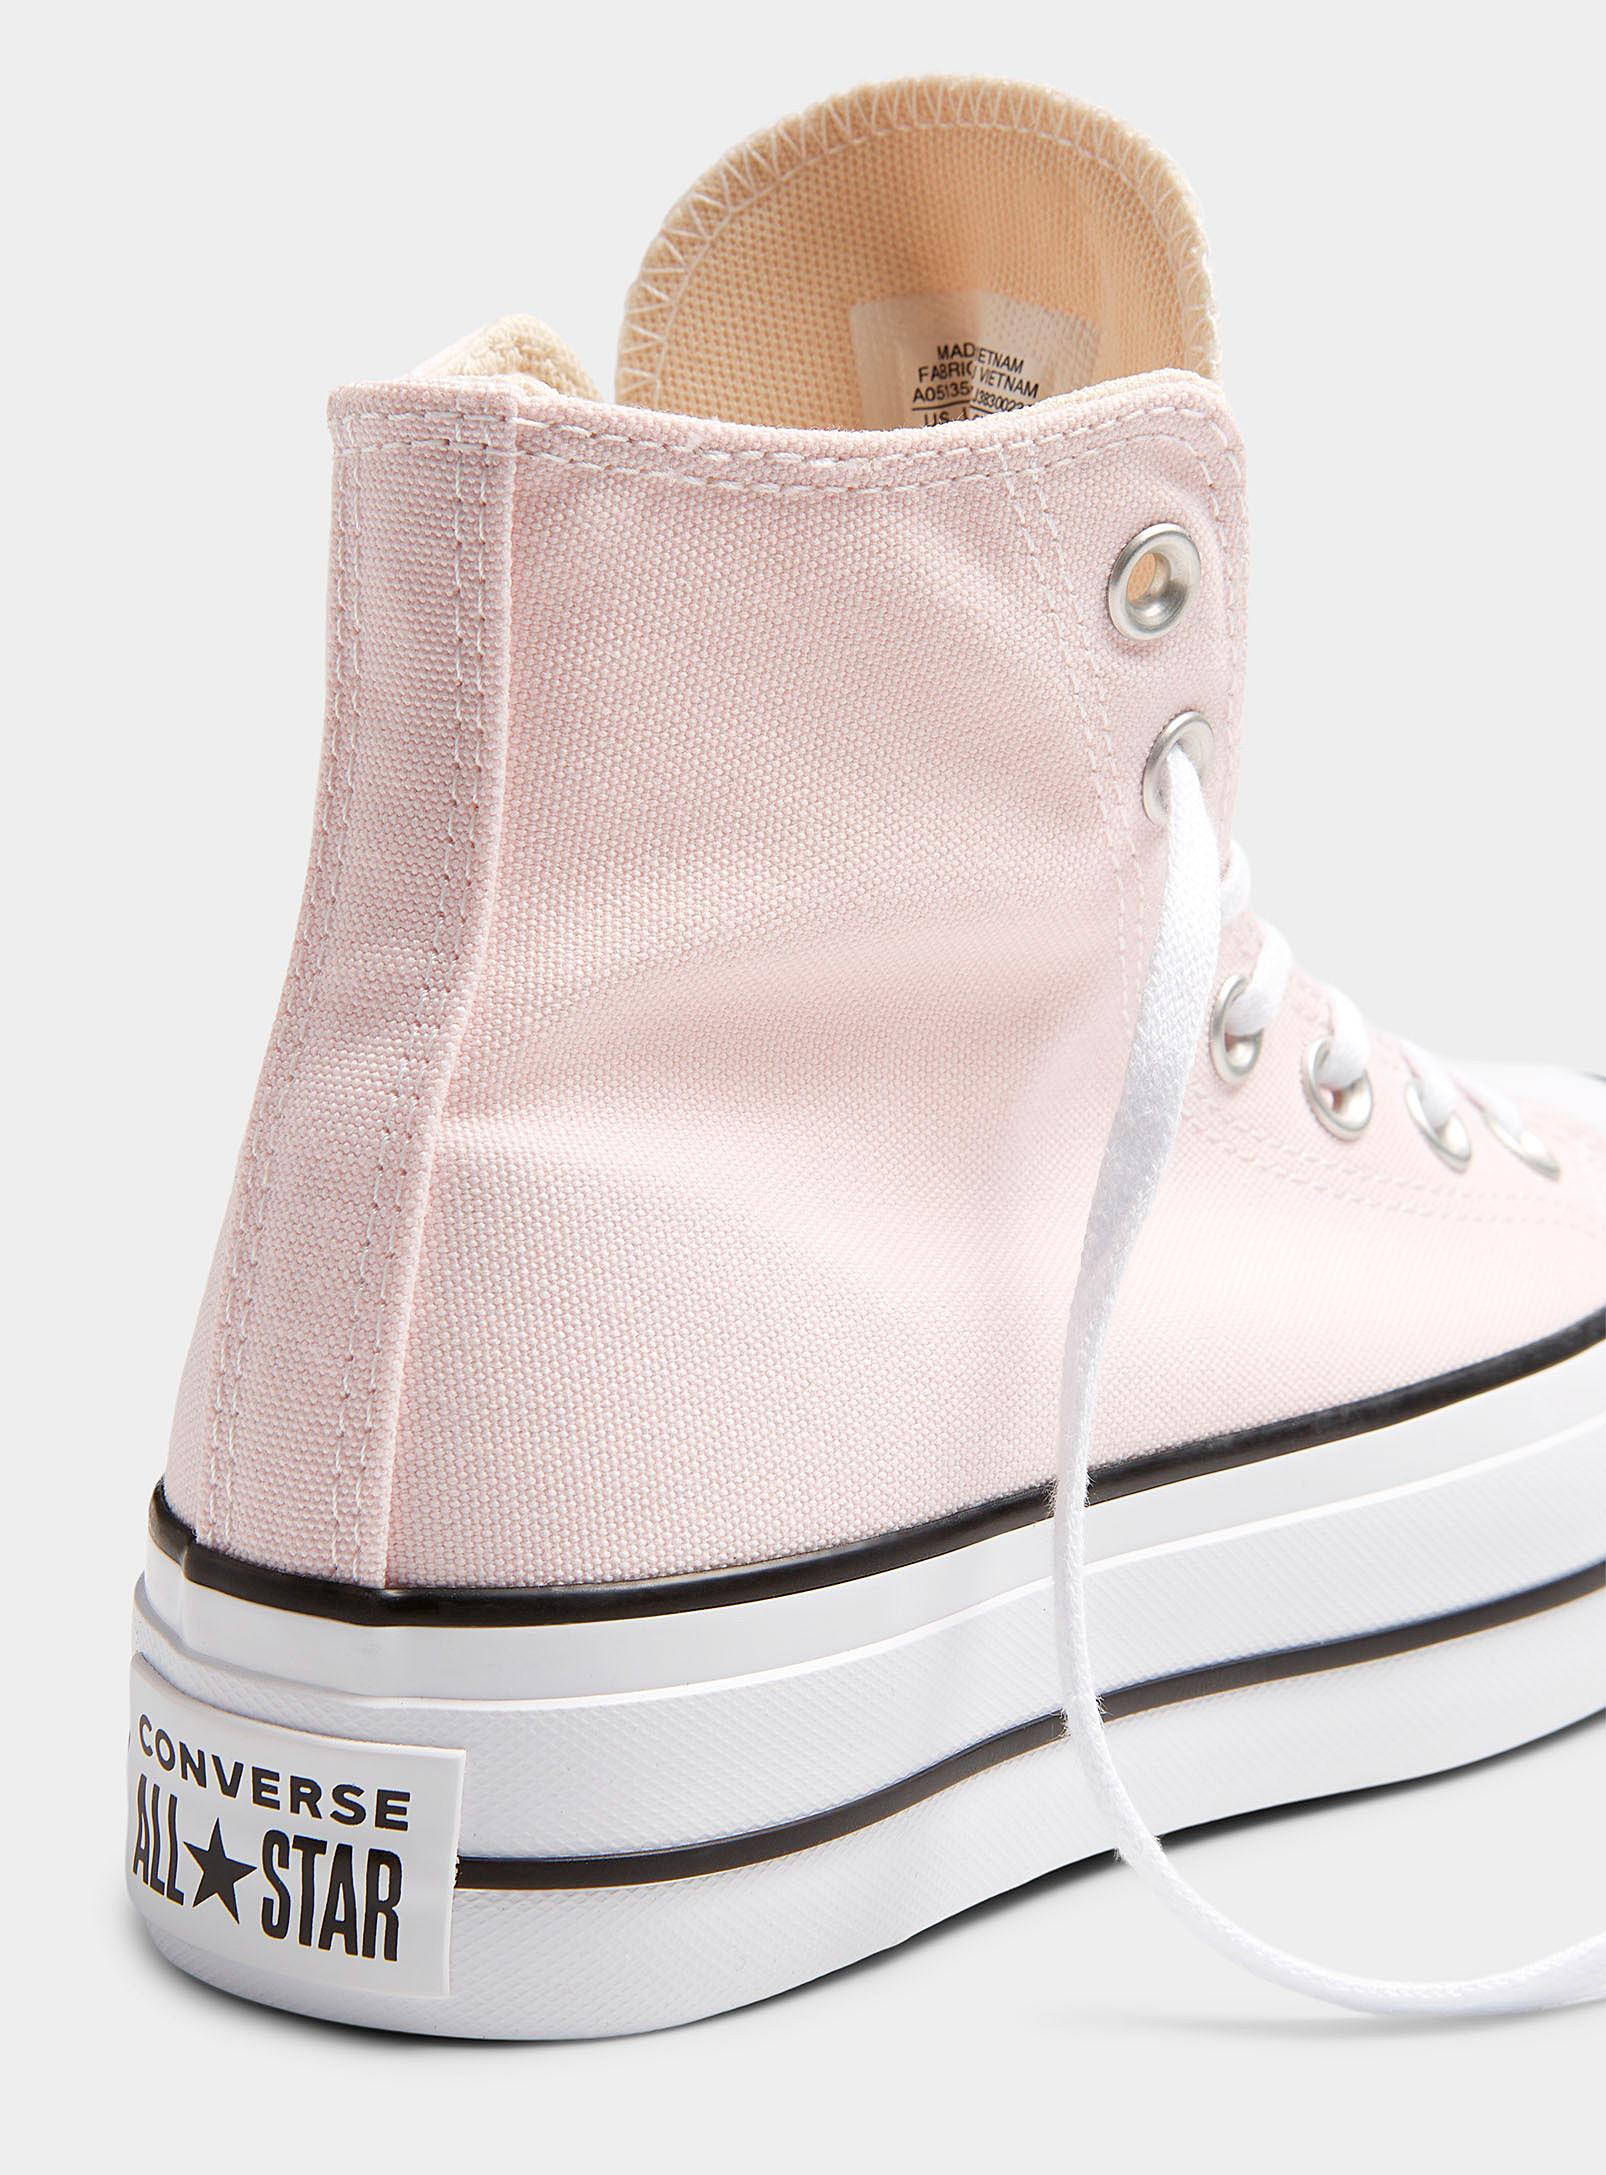 Converse Chuck Taylor All Star Lift High Top Powder Pink Platform Sneakers  Women in Natural | Lyst